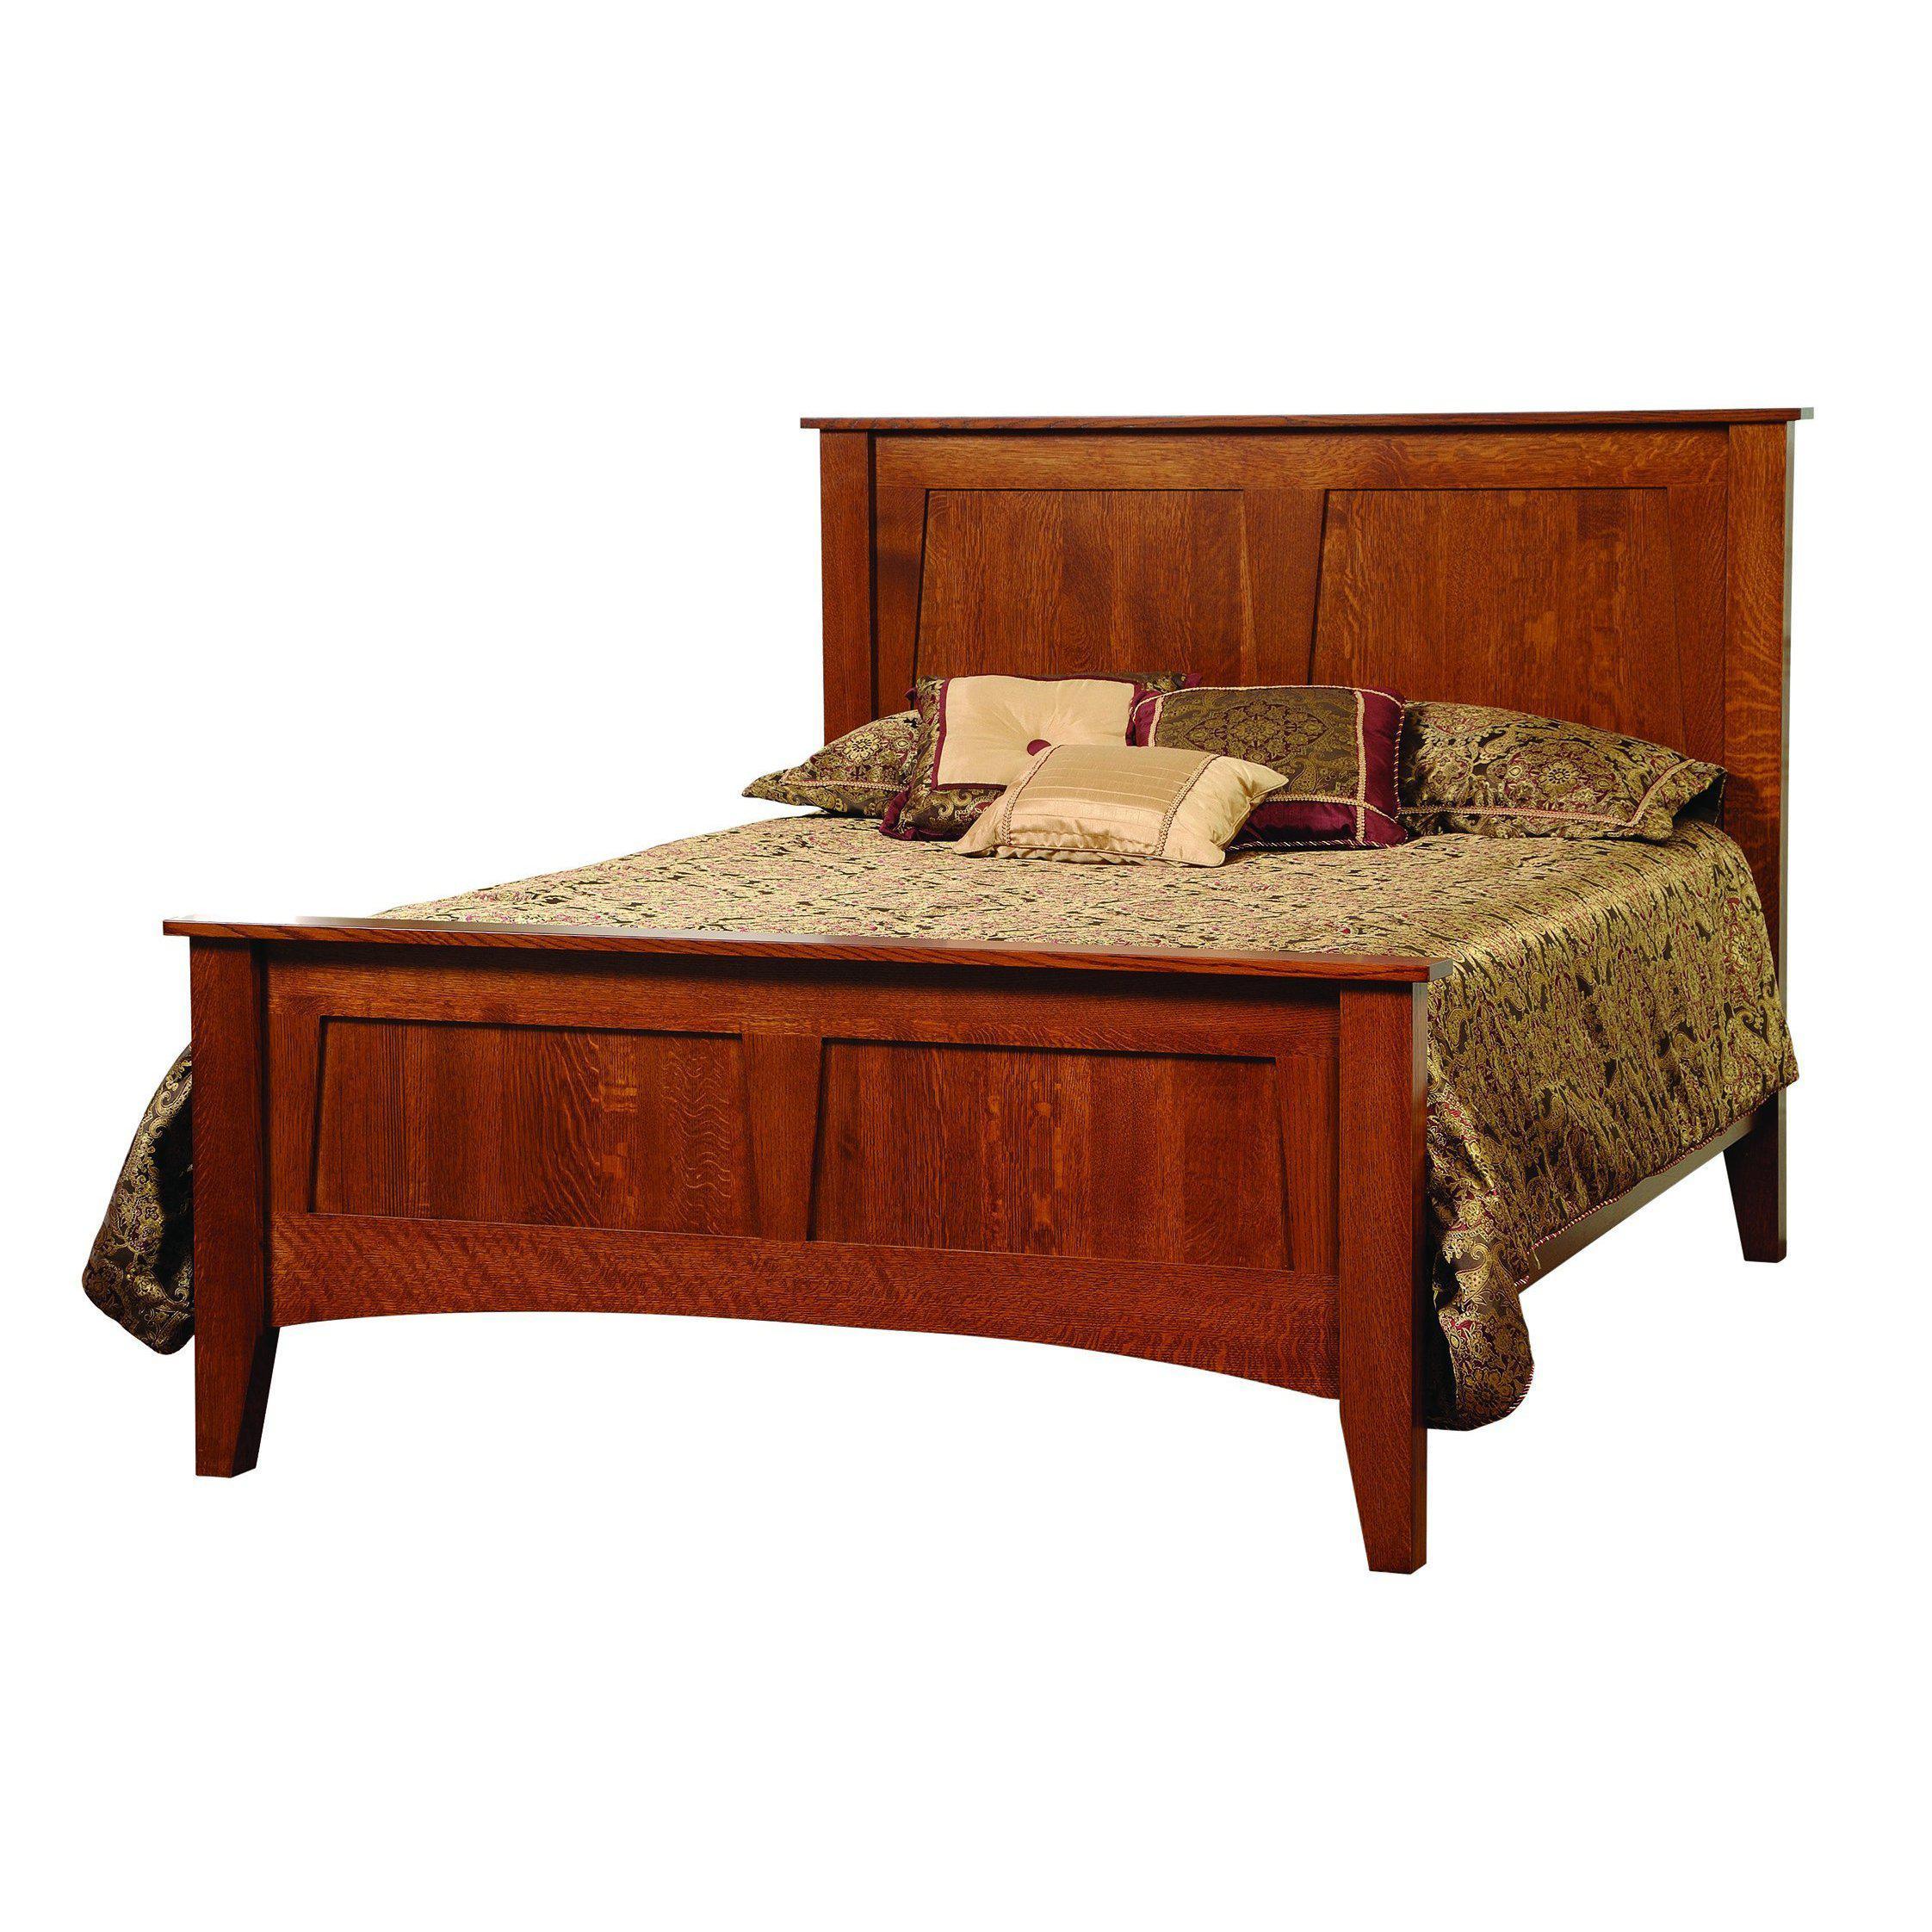 Heirloom Mission Bed-The Amish House